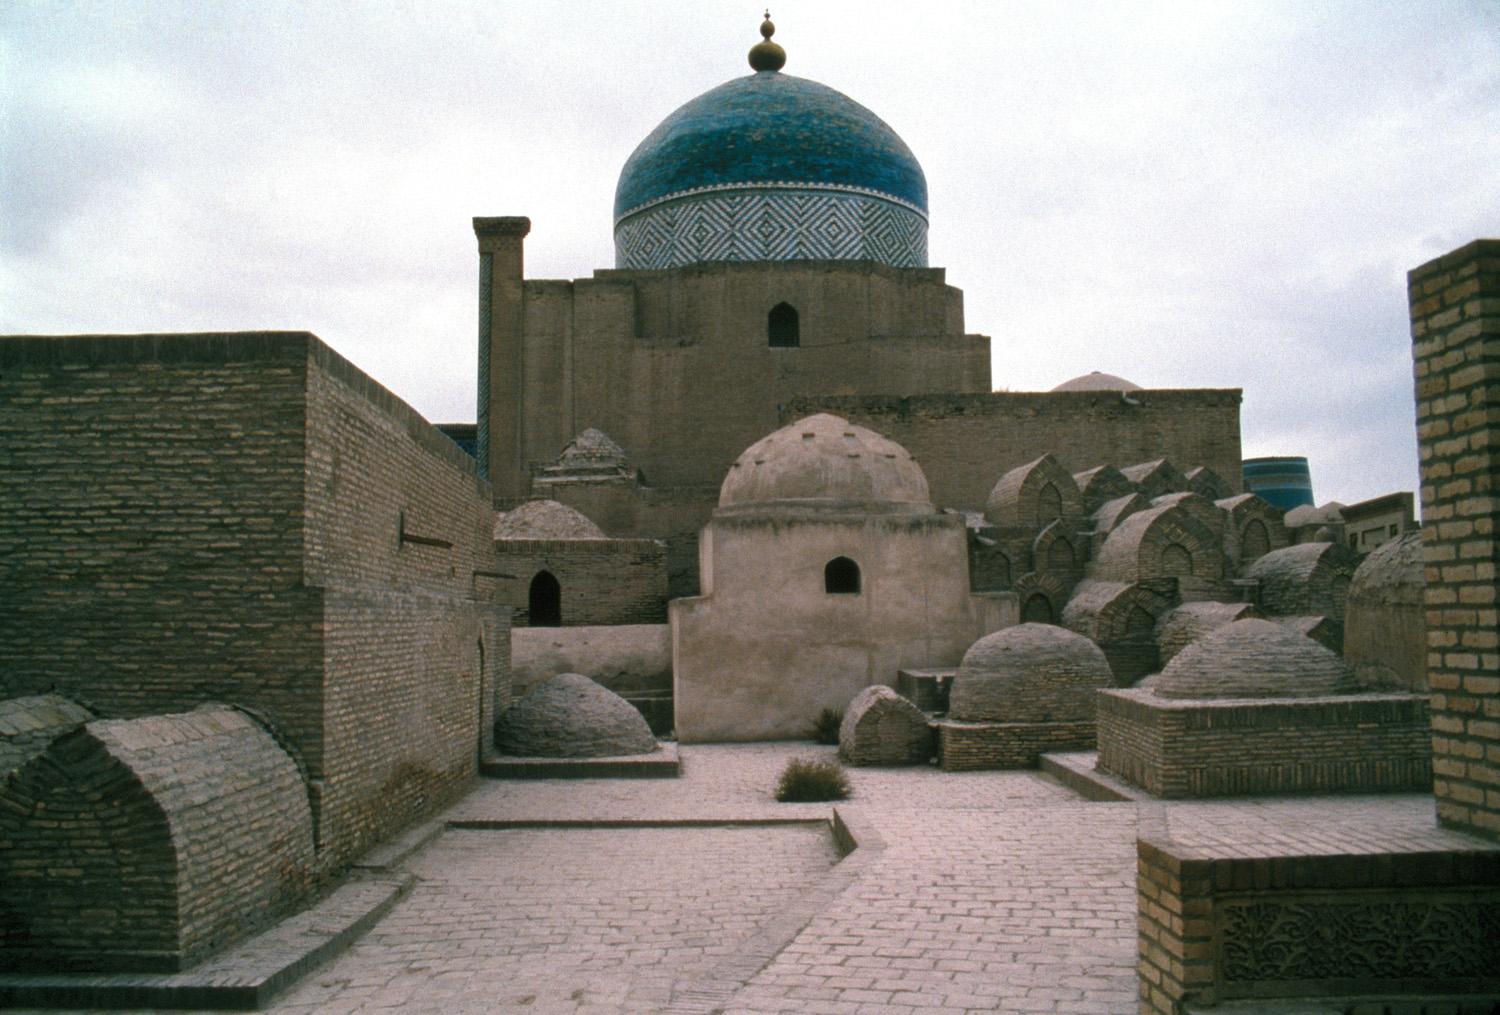 Exterior side view of the khanagah with adjacent tombs in the foreground